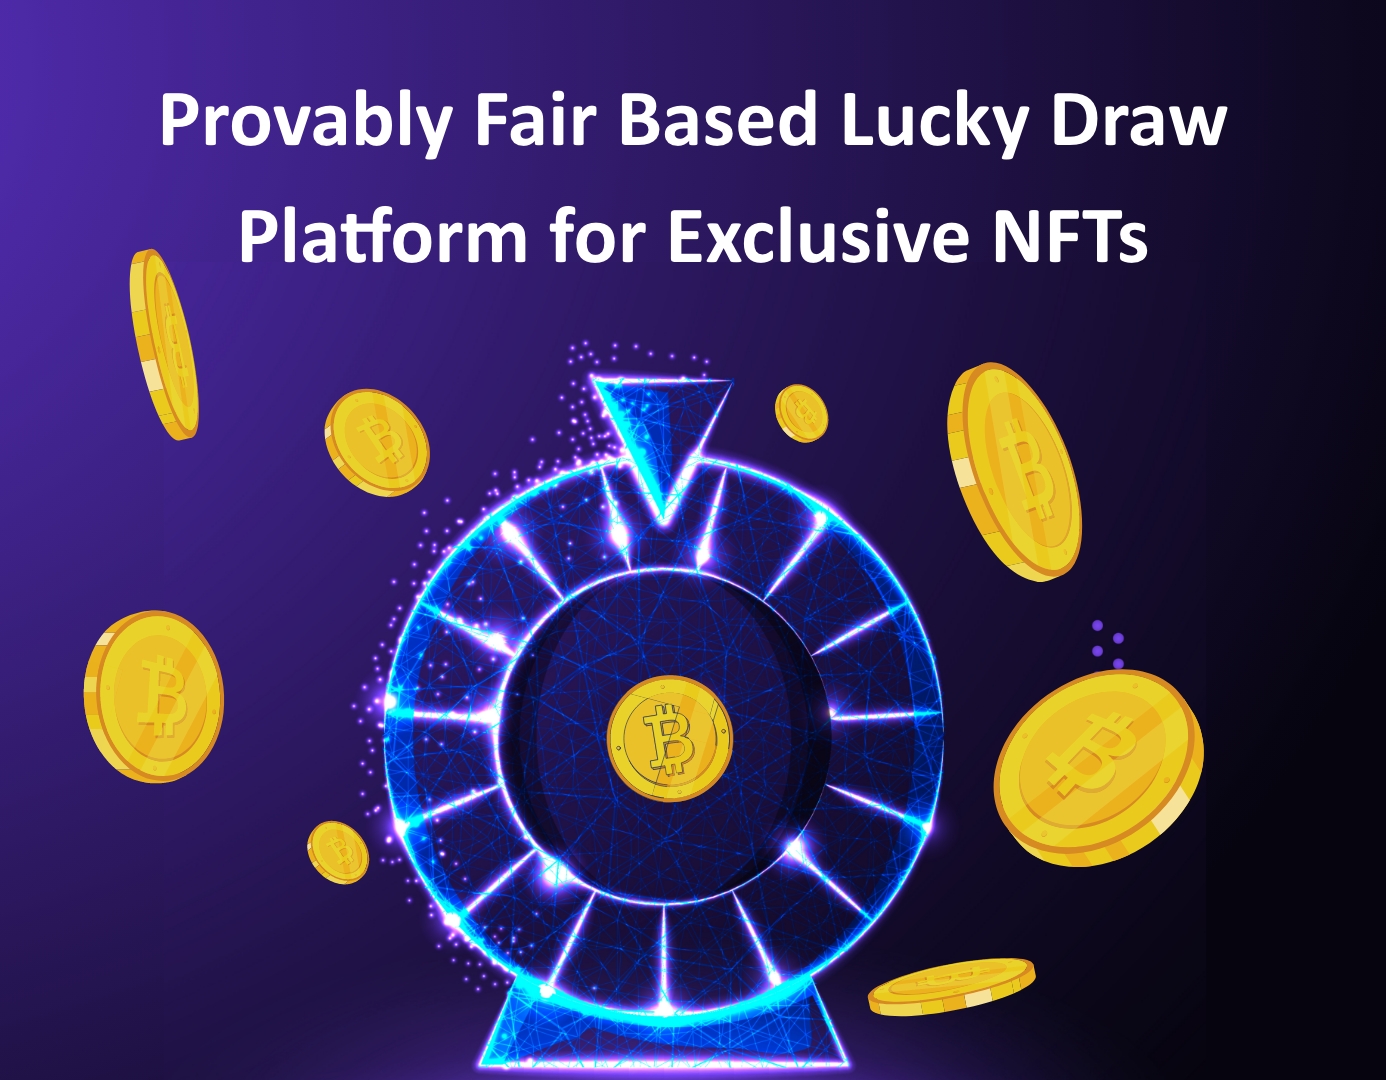 Provably Fair Based Lucky Draw Platform for Exclusive NFTs